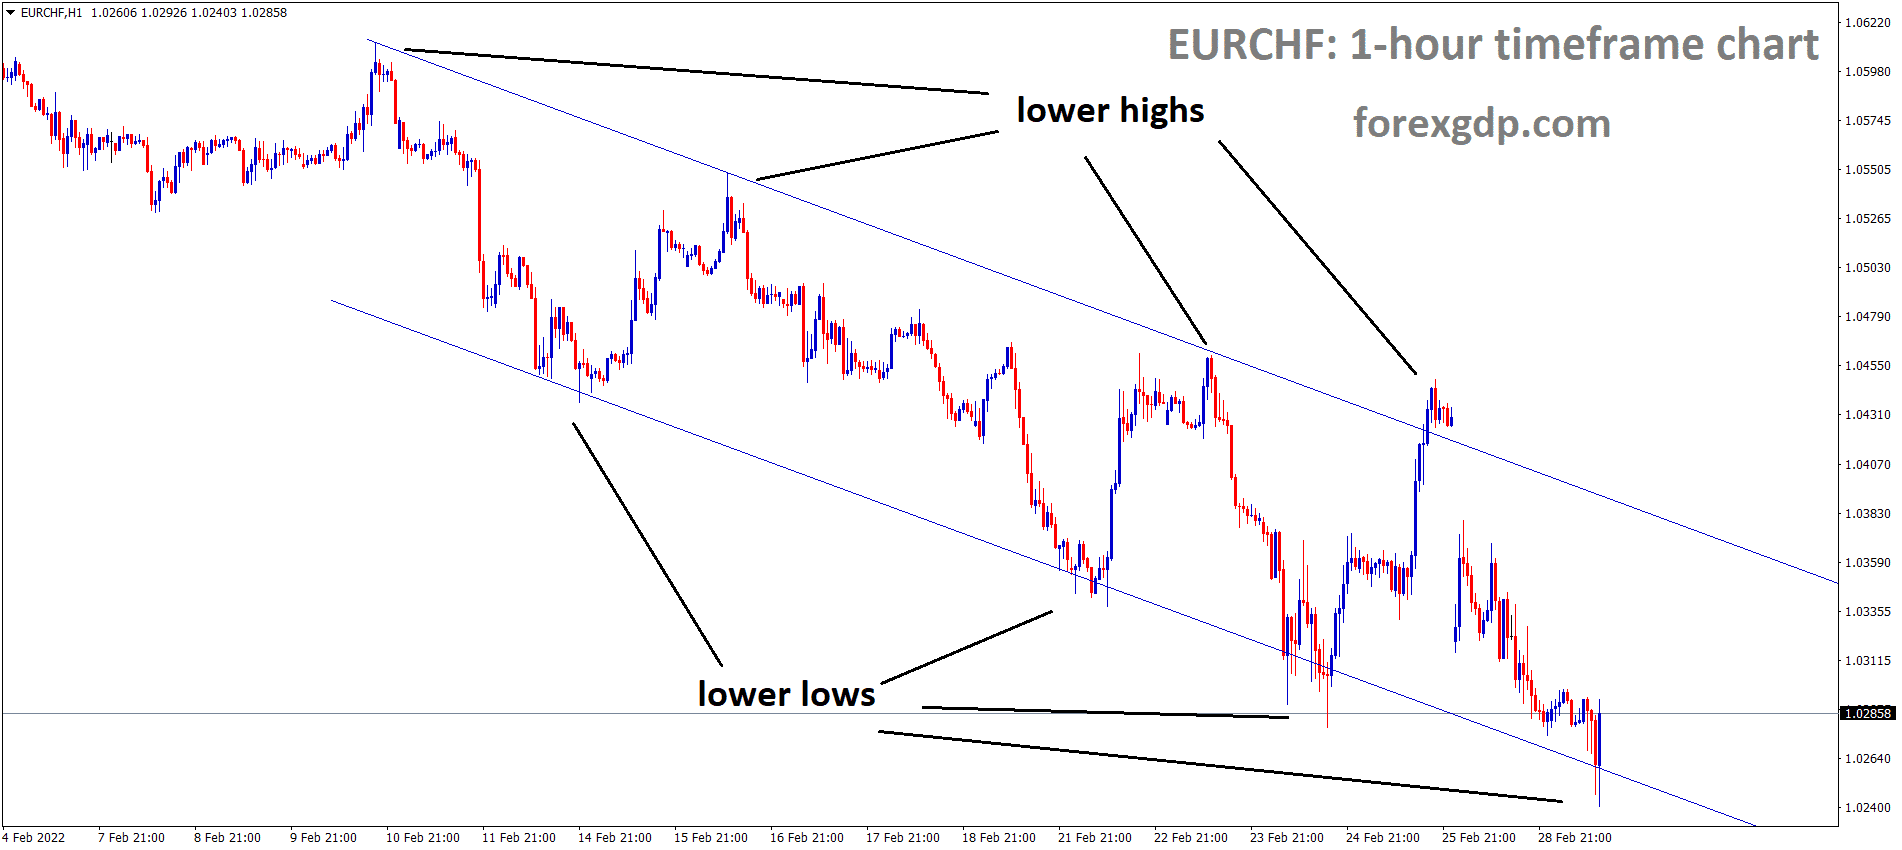 EURCHF is moving in the Descending channel and the market has rebounded from the lower low area of the channel.